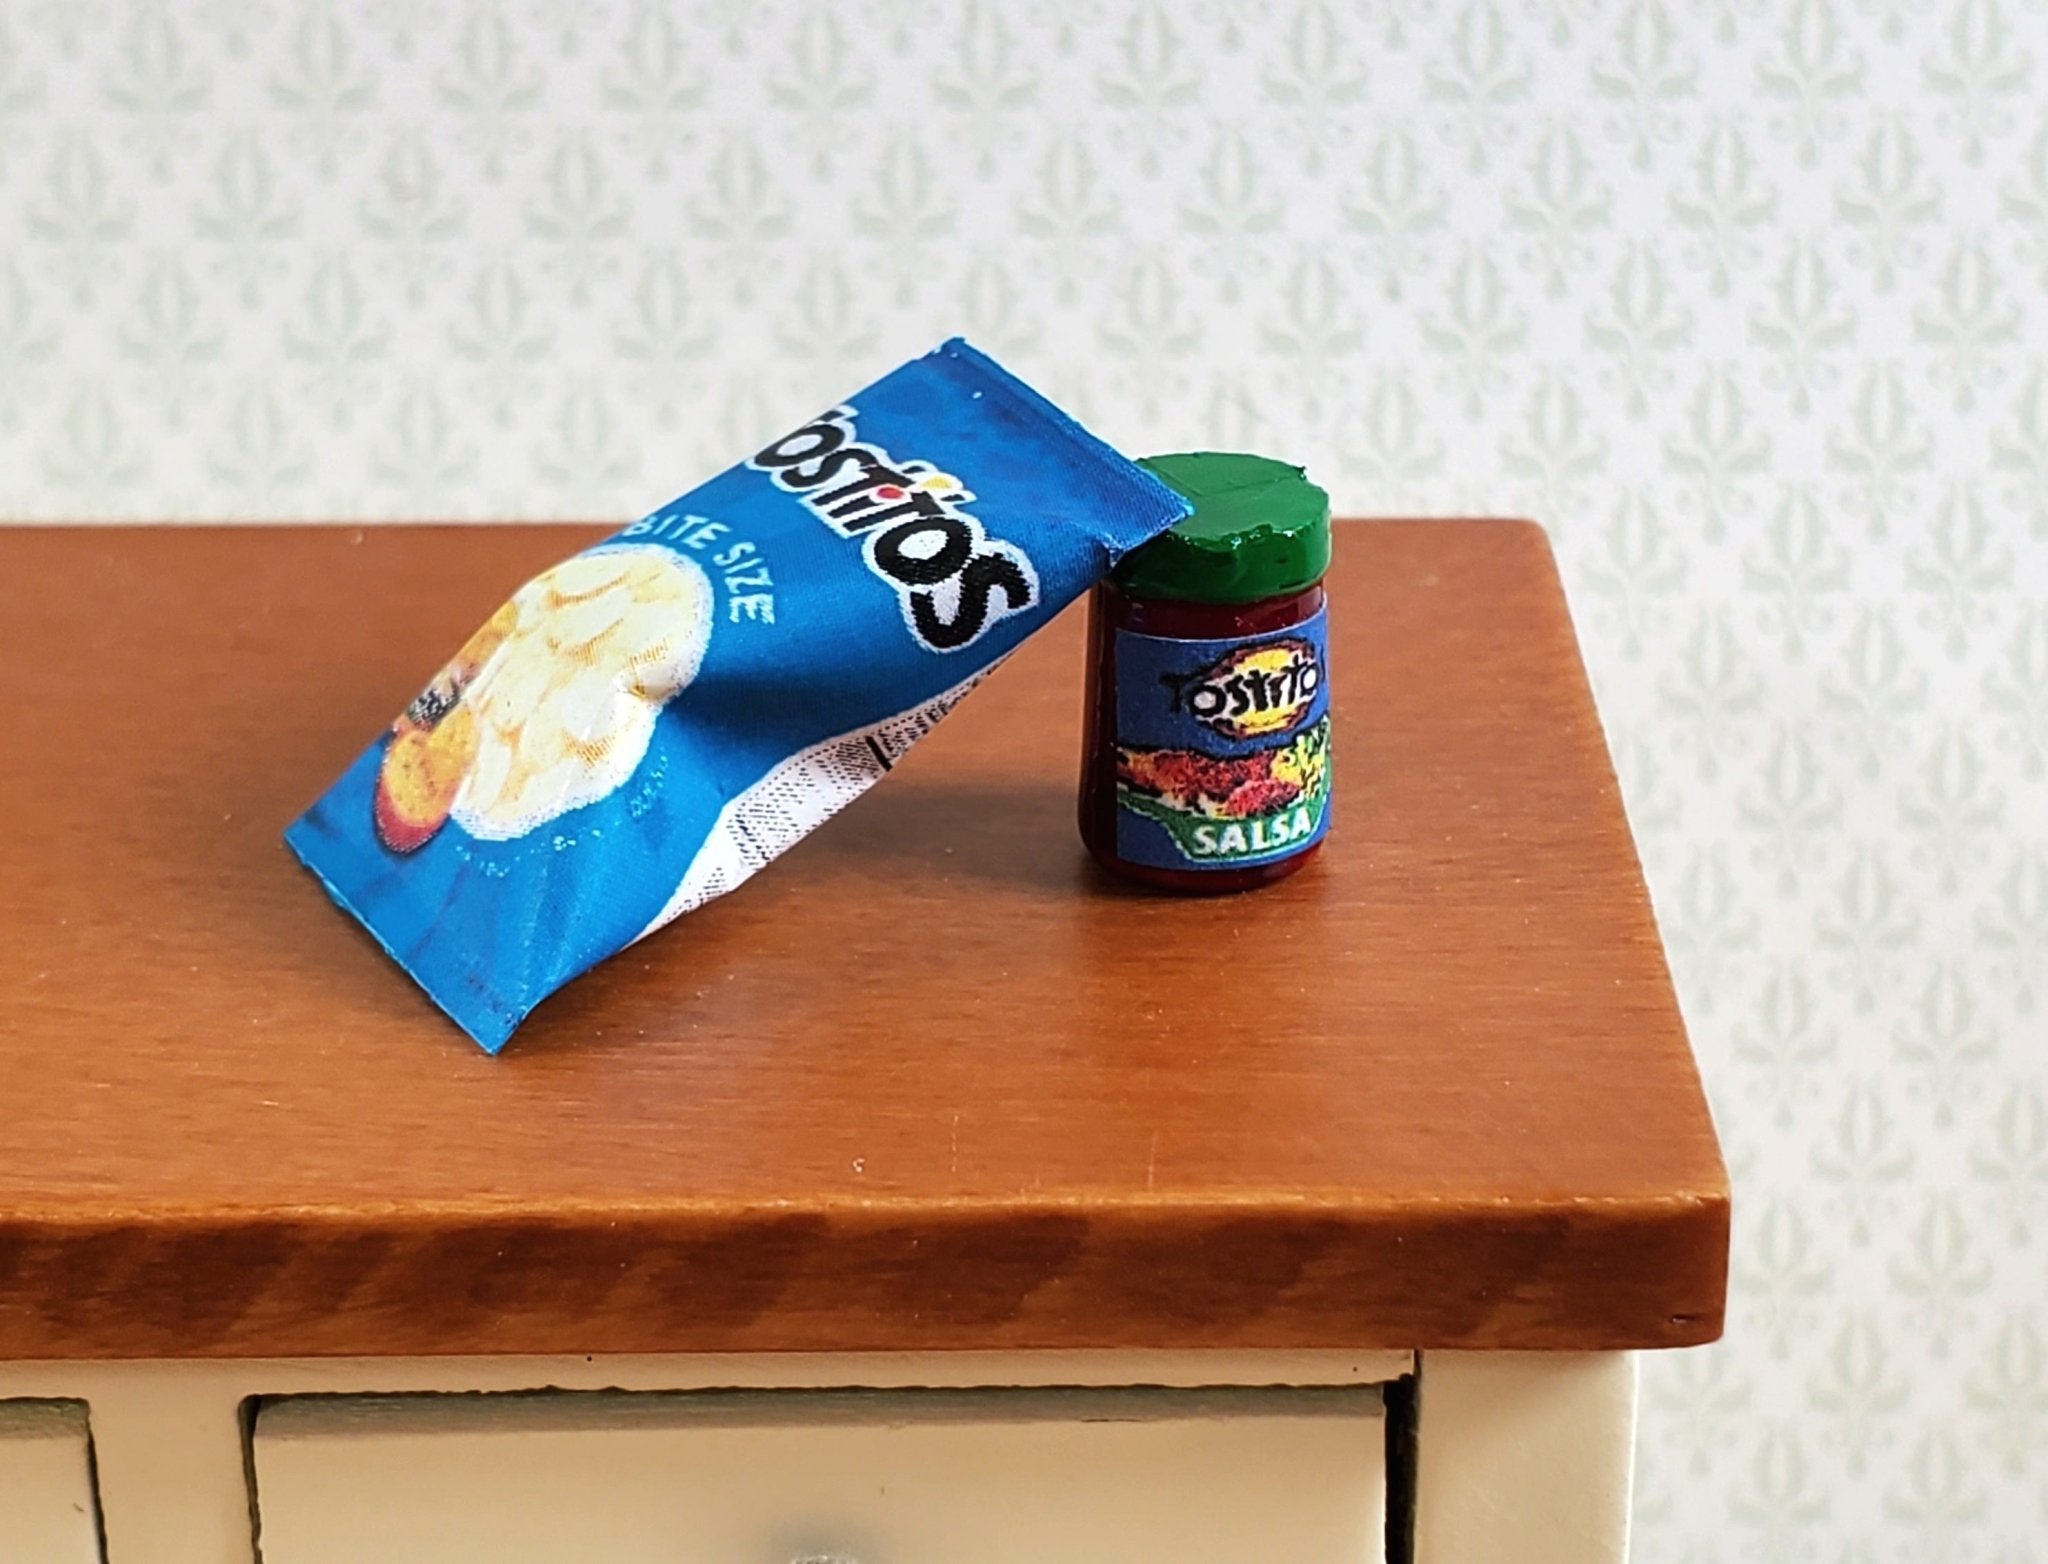 Dollhouse Tostitos Bag of Corn Chips & Salsa 1:12 Scale Miniature Food  Kitchen